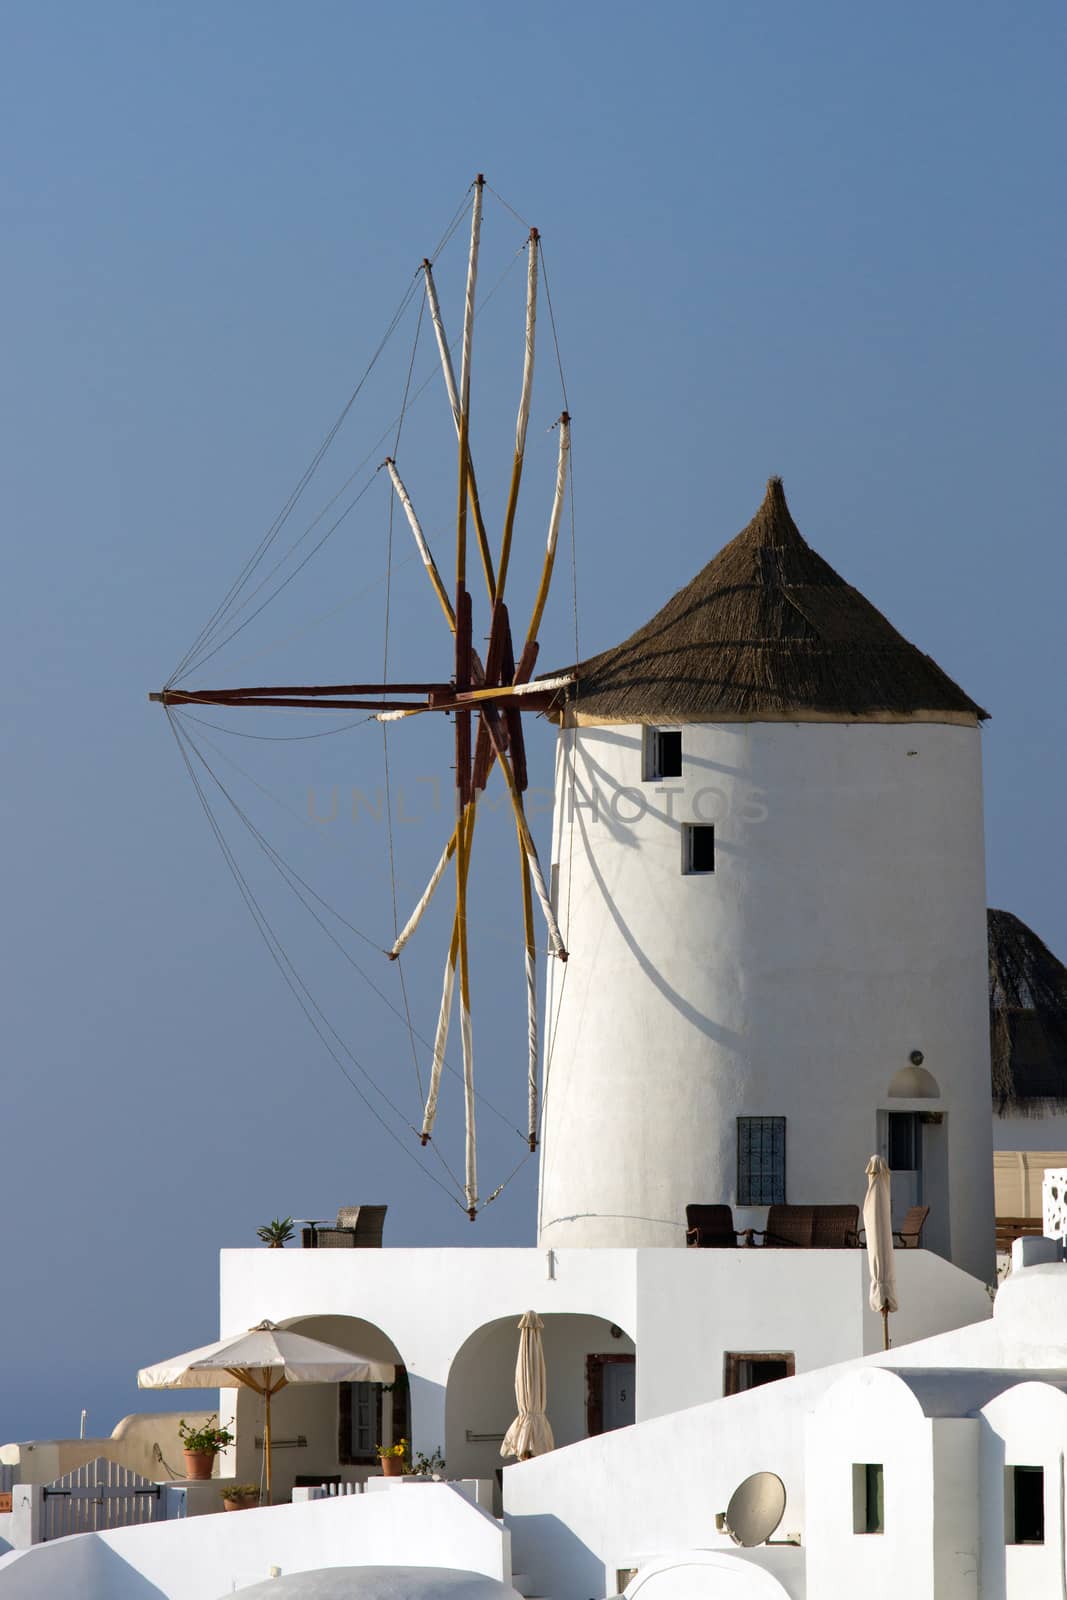 One of the typical windmills in Oia on Santorini island